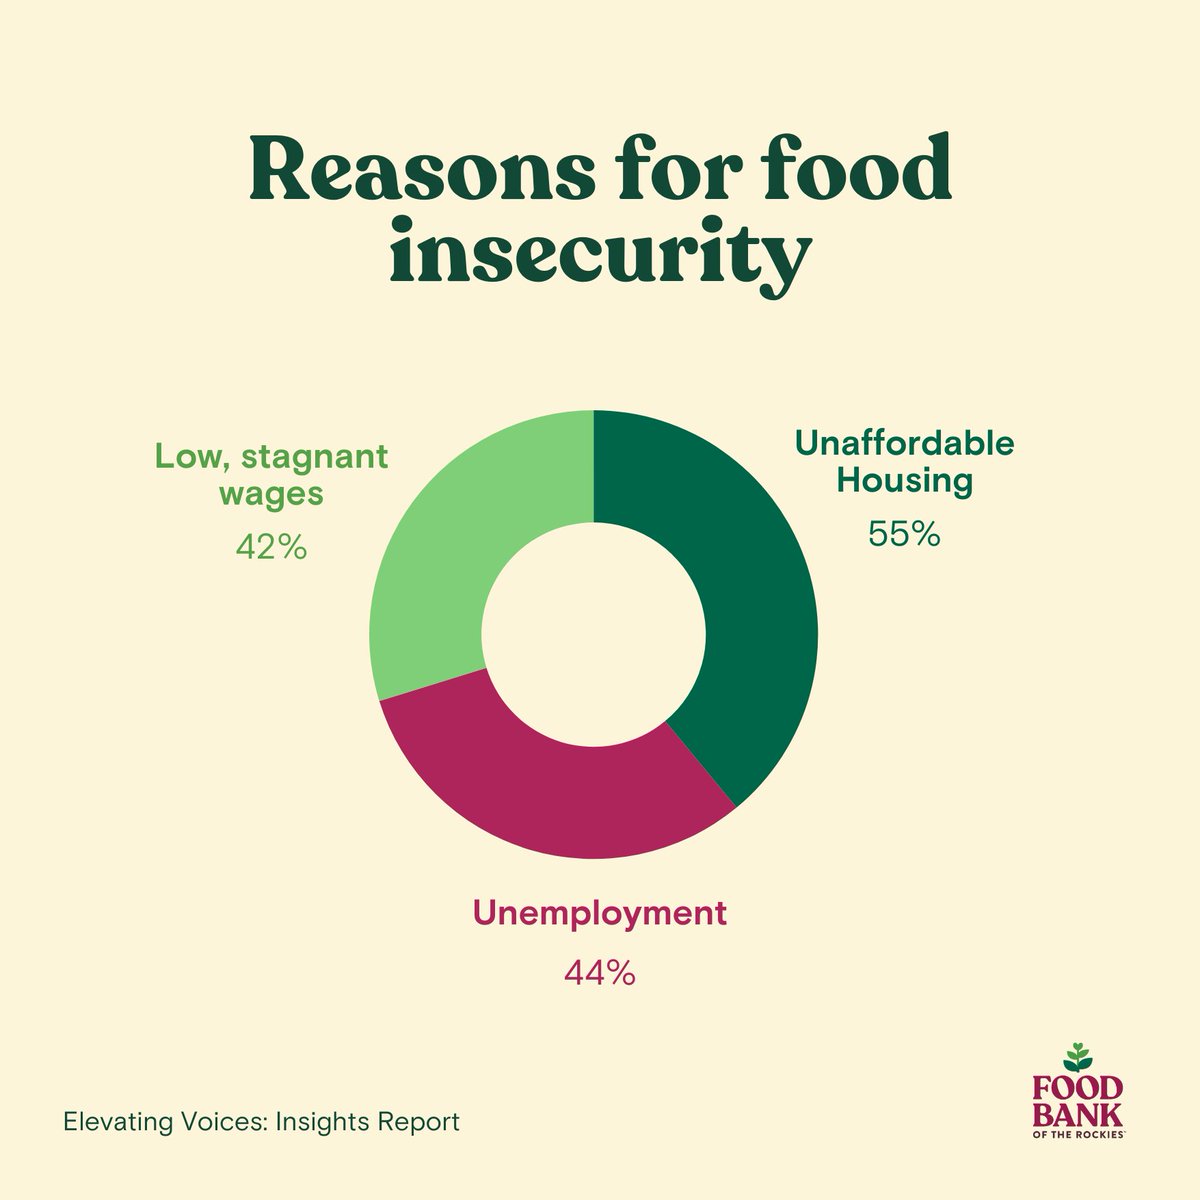 High cost of living, unemployment, and low-wage jobs are the root causes of food insecurity. To learn more about how Food Bank of the Rockies is working to ensure food access for everyone in our community, please visit lnkd.in/ganwr8kB 💚